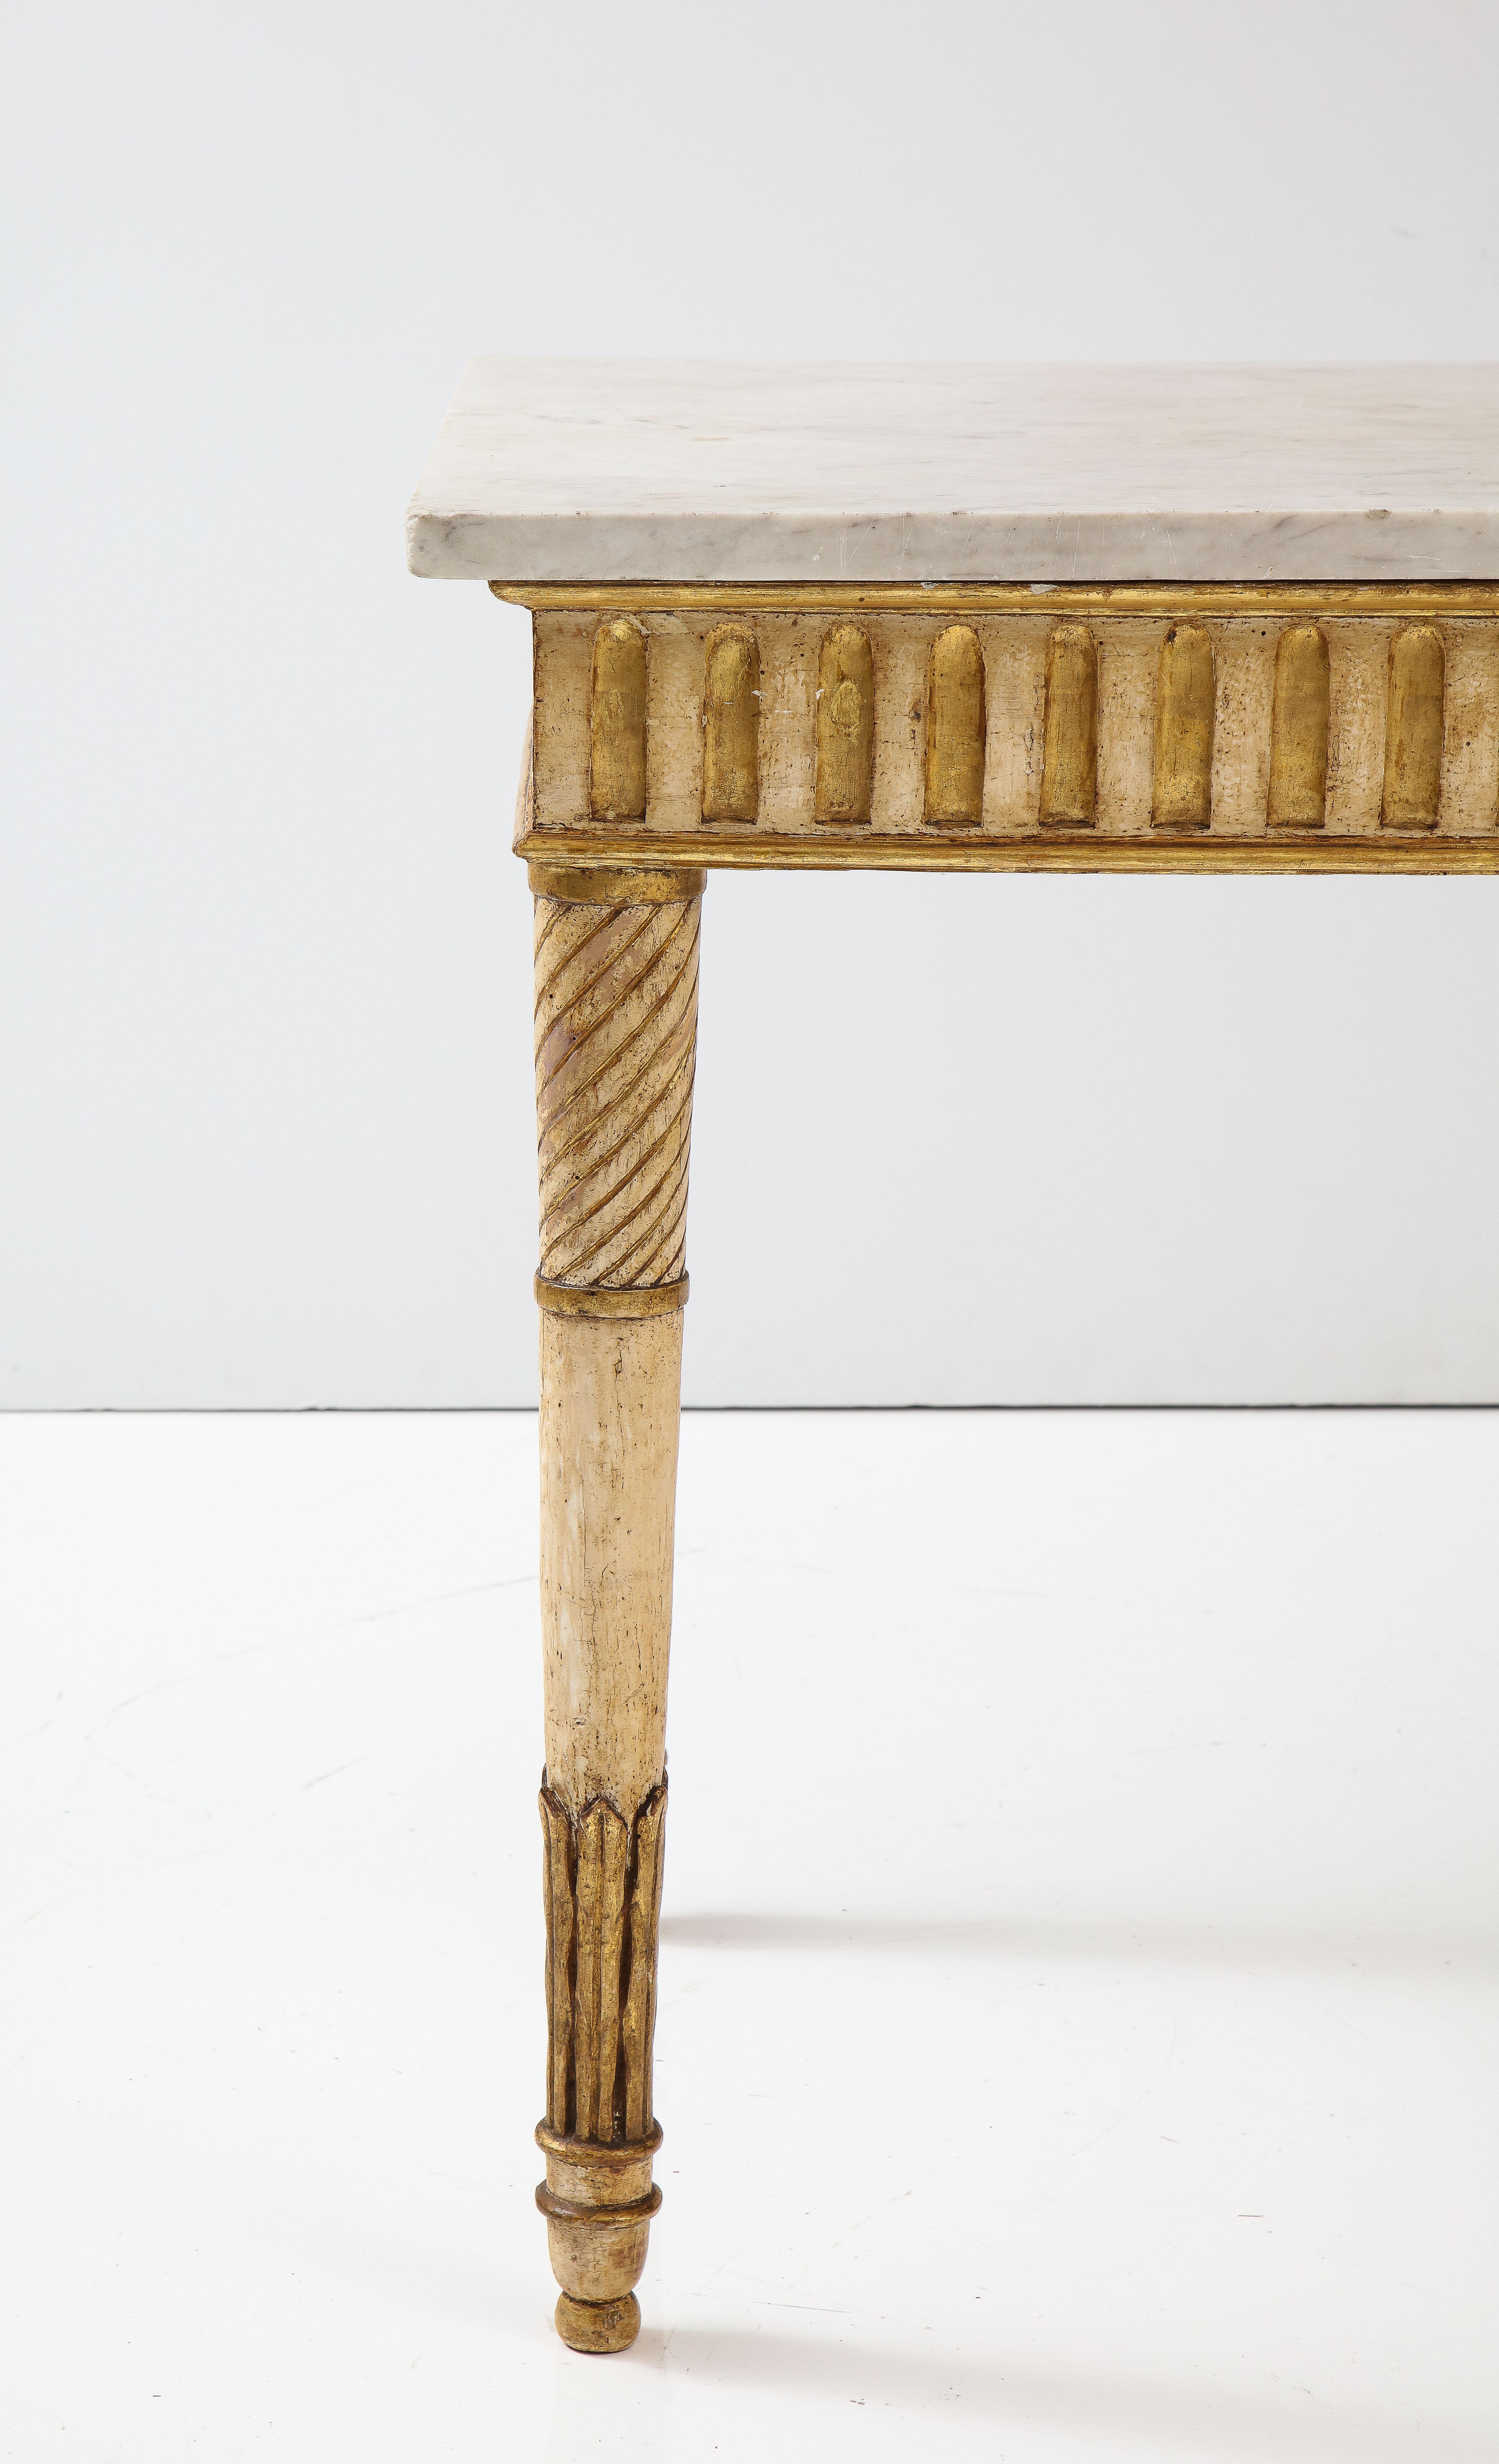 Carrara Marble Neoclassical Italian Painted and Gilded Console Table with Carrera Marble Top